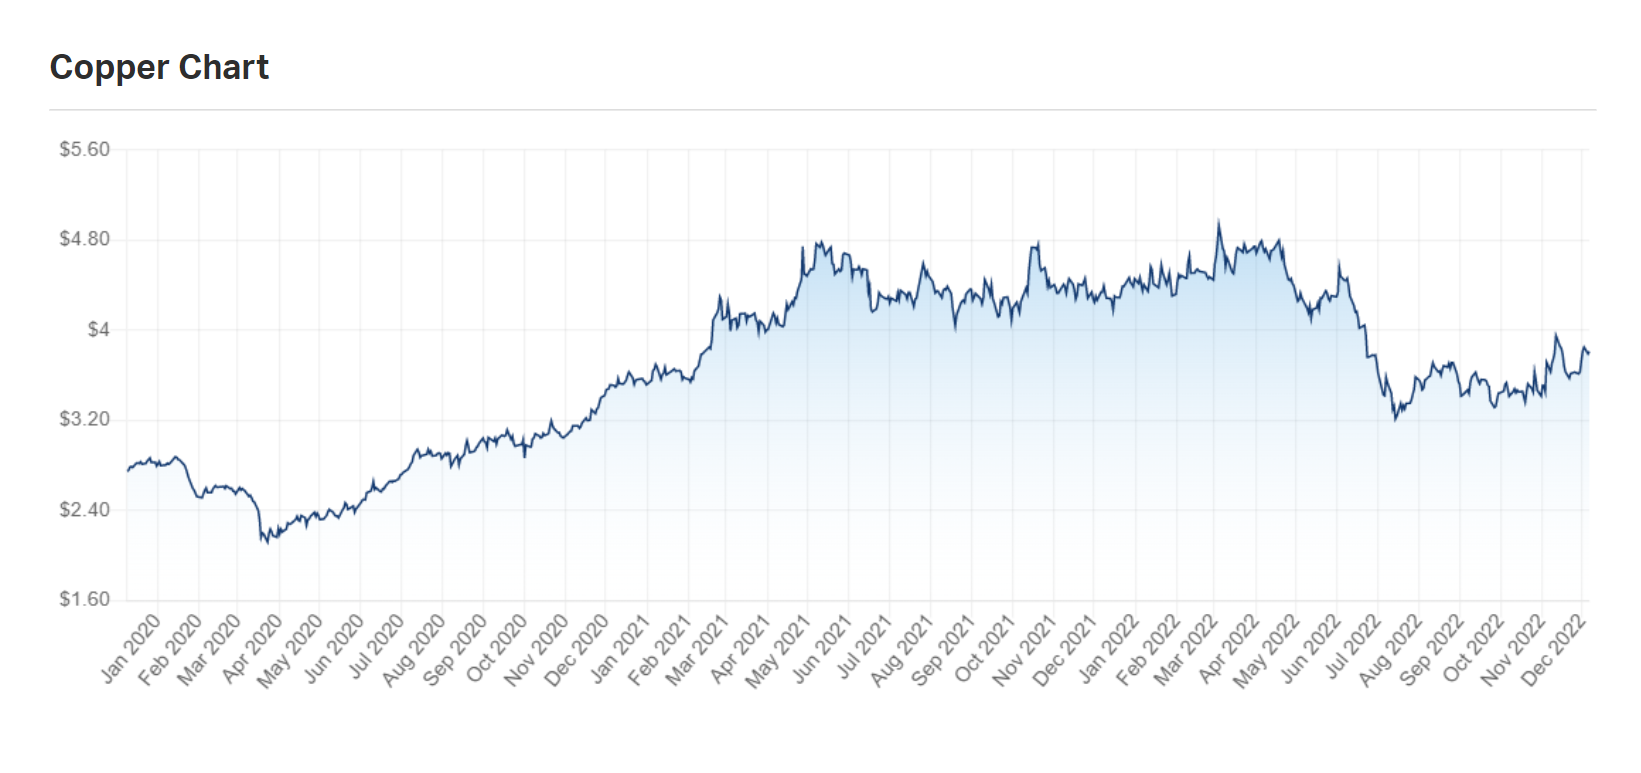 A look at the copper price chart available on Market Index as at 7 December 